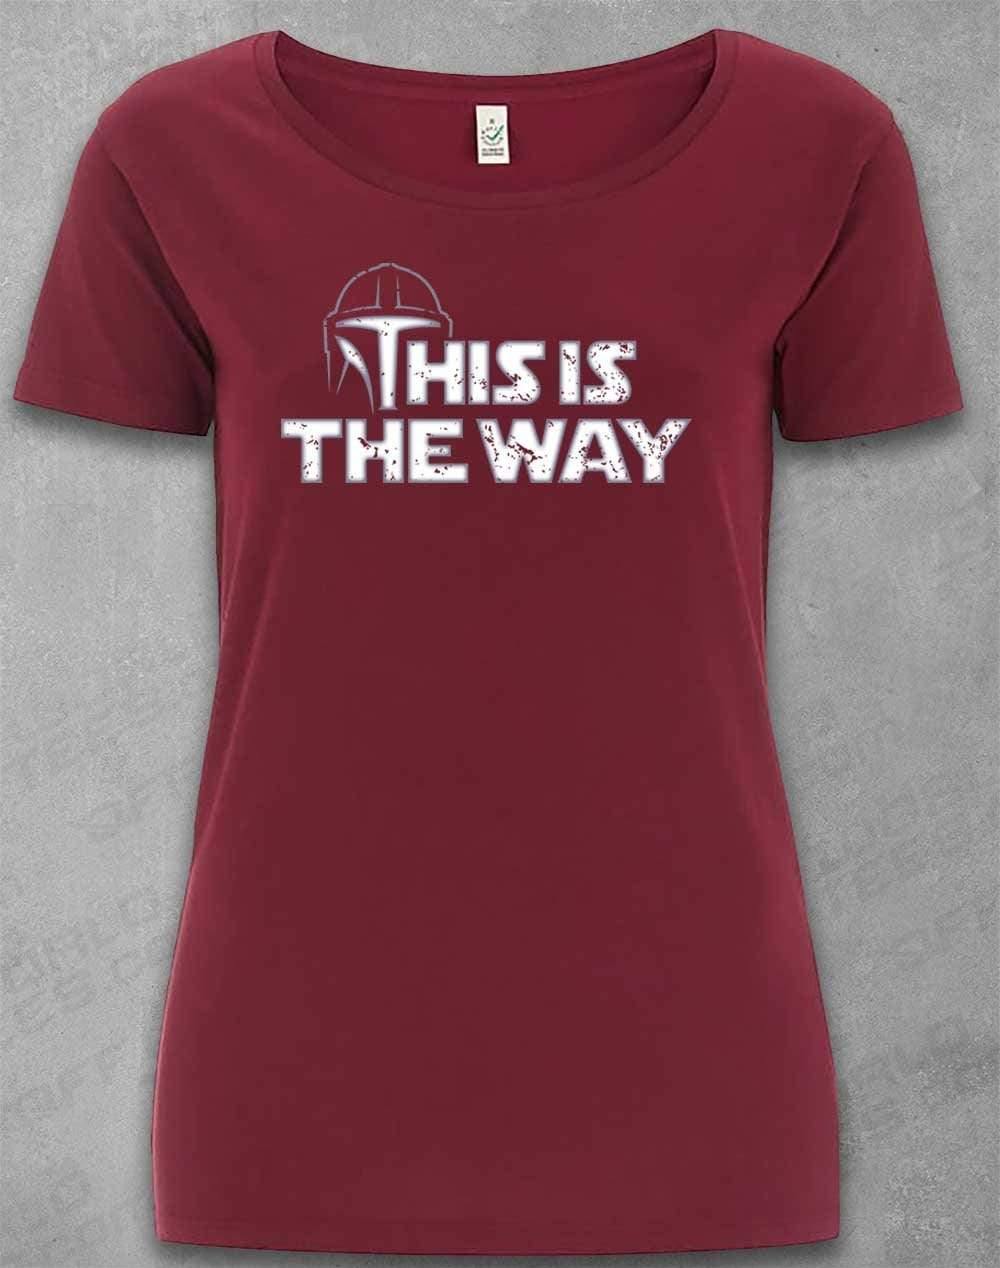 DELUXE This is the Way - Organic Scoop Neck T-Shirt 8-10 / Burgundy  - Off World Tees